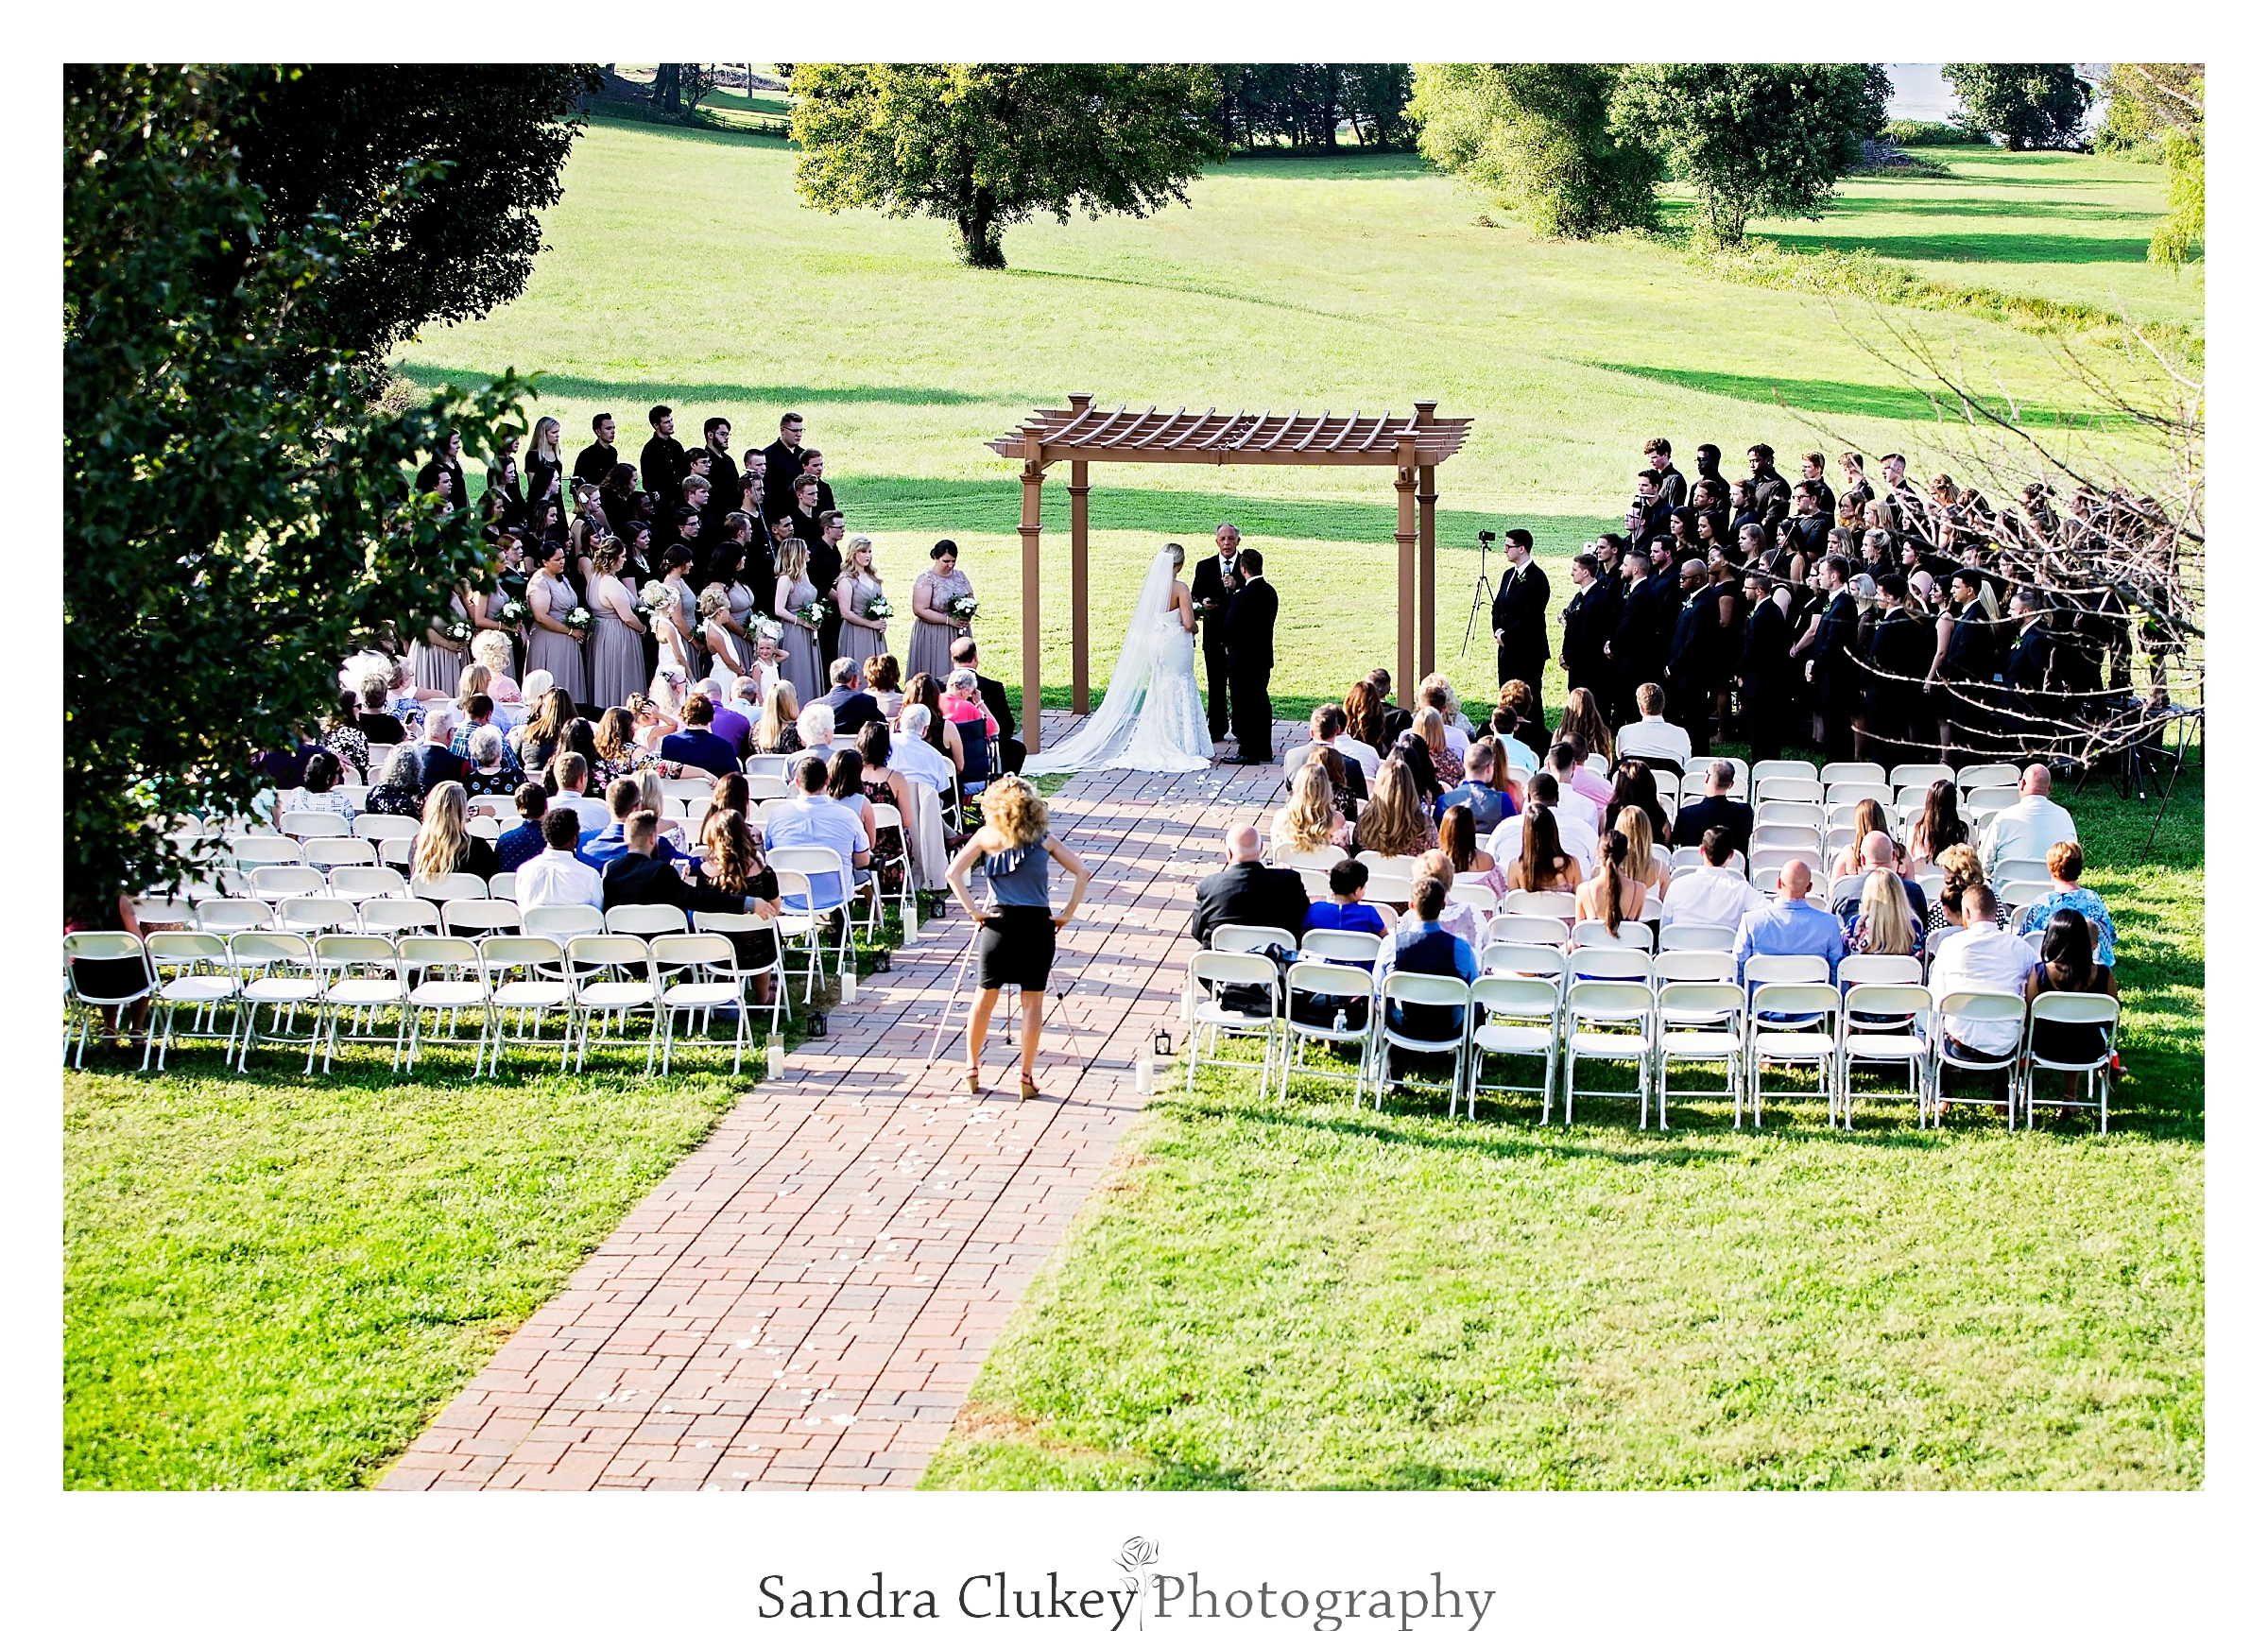 Tennessee RiverPlace wedding ceremony aerial view